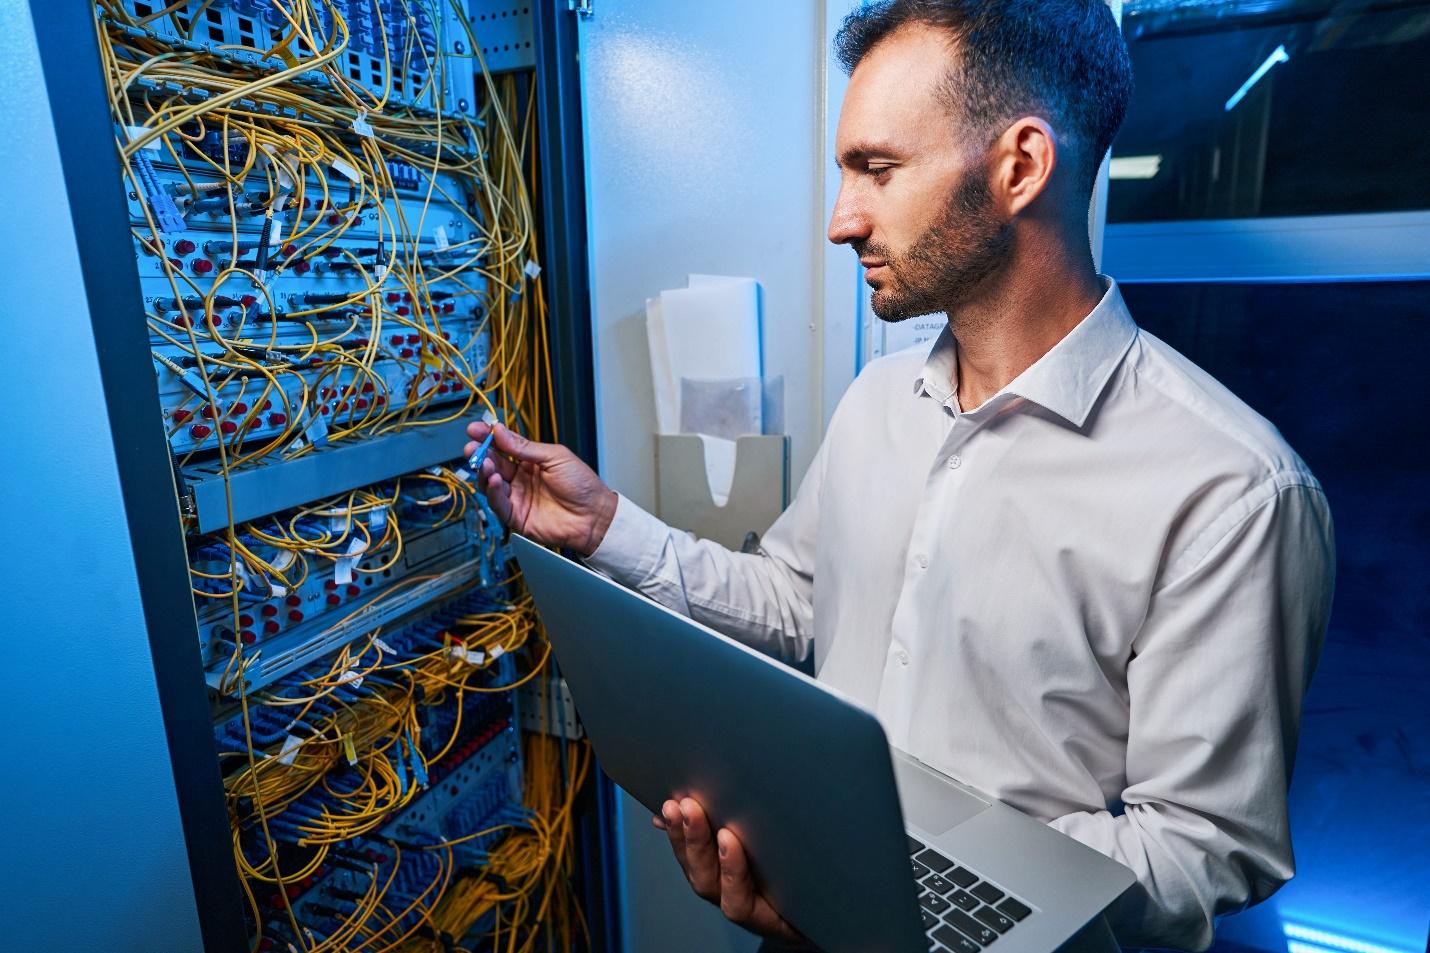 A male IT technician holds a laptop while connecting a cable to a server rack.